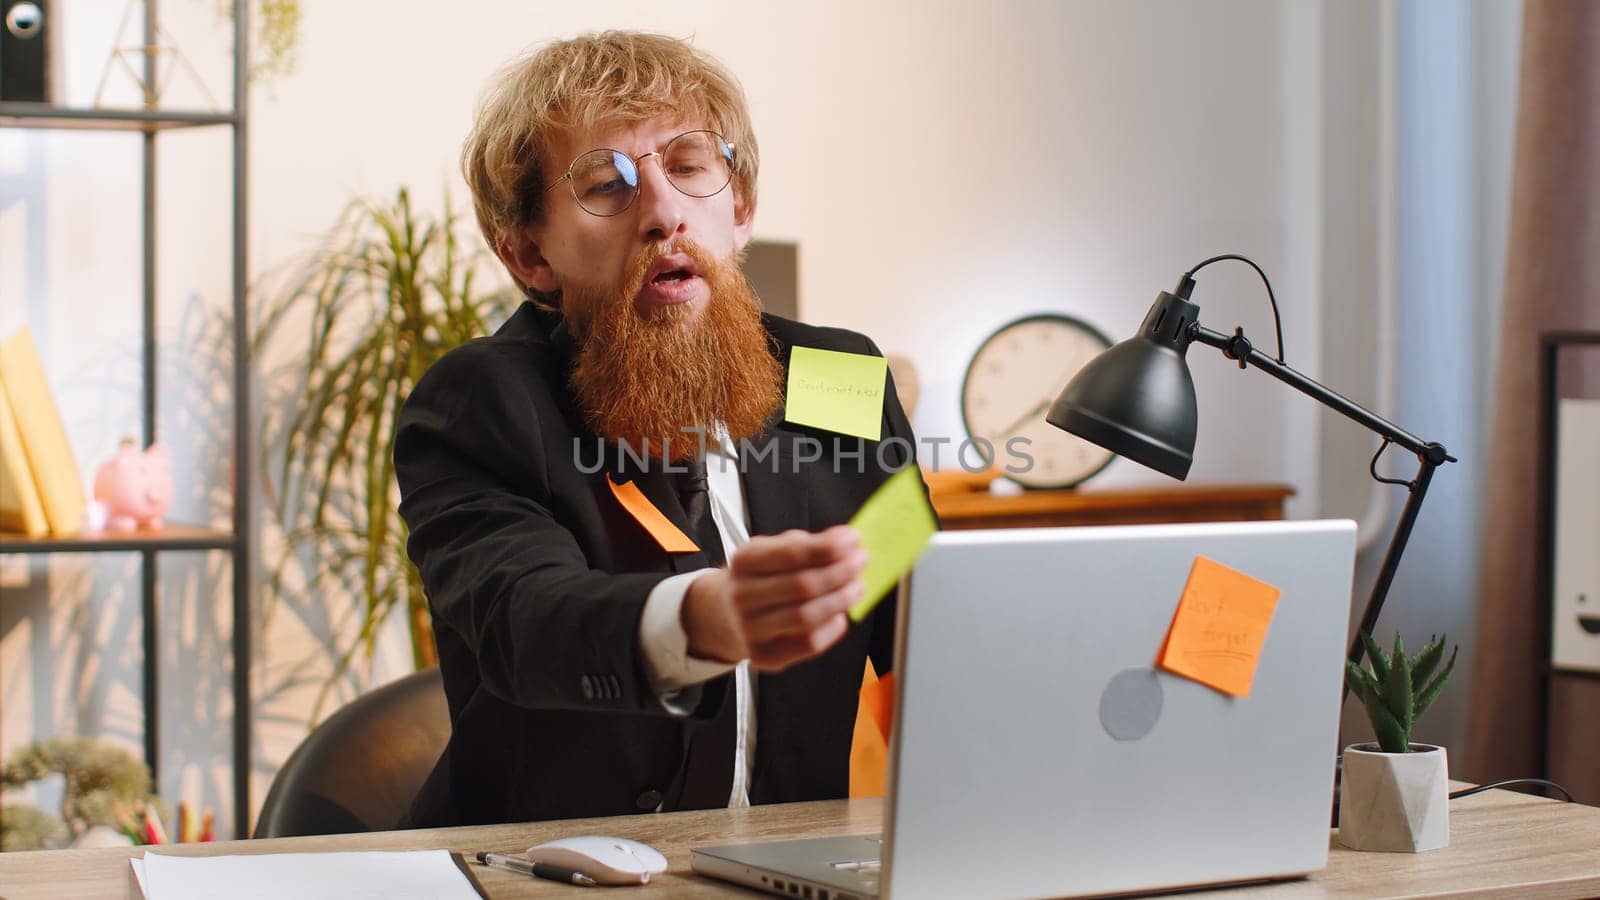 Tired sad exhausted businessman working on laptop at office with many sticker tasks, panic attack by efuror